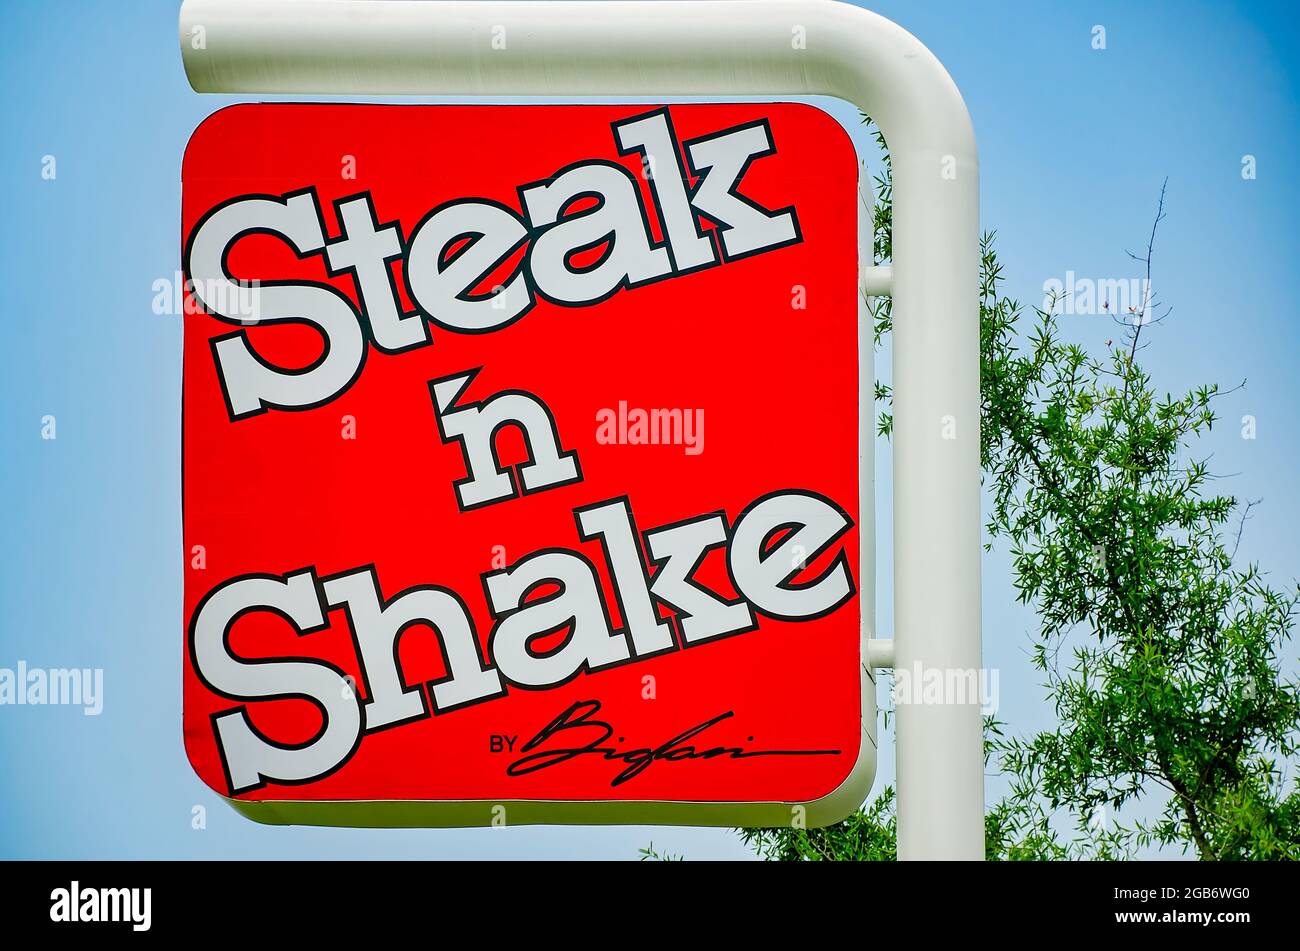 The Steak ’n Shake sign is pictured at a restaurant on Highway 90, Aug. 1, 2021, in Mobile, Alabama. Steak ’n Shake was founded in 1934 in Illinois. Stock Photo